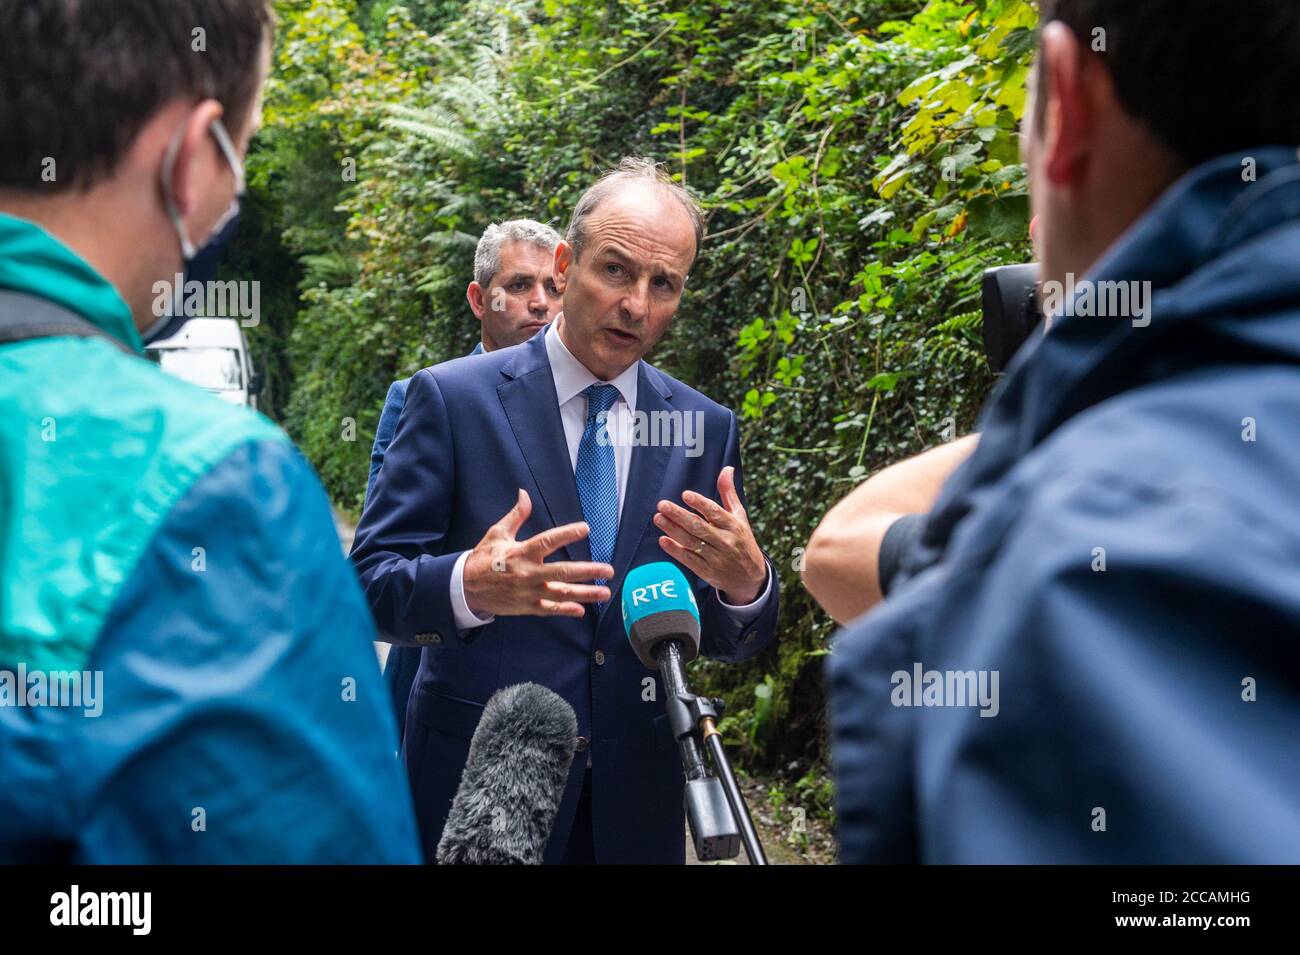 Skibbereen, West Cork, Ireland. 20th Aug, 2020. An Taoiseach Micháel Martin visited the victims of last night's floods in Skibbereen. The Taoiseách gives an impromptu press conference. Credit: AG News/Alamy Live News Stock Photo